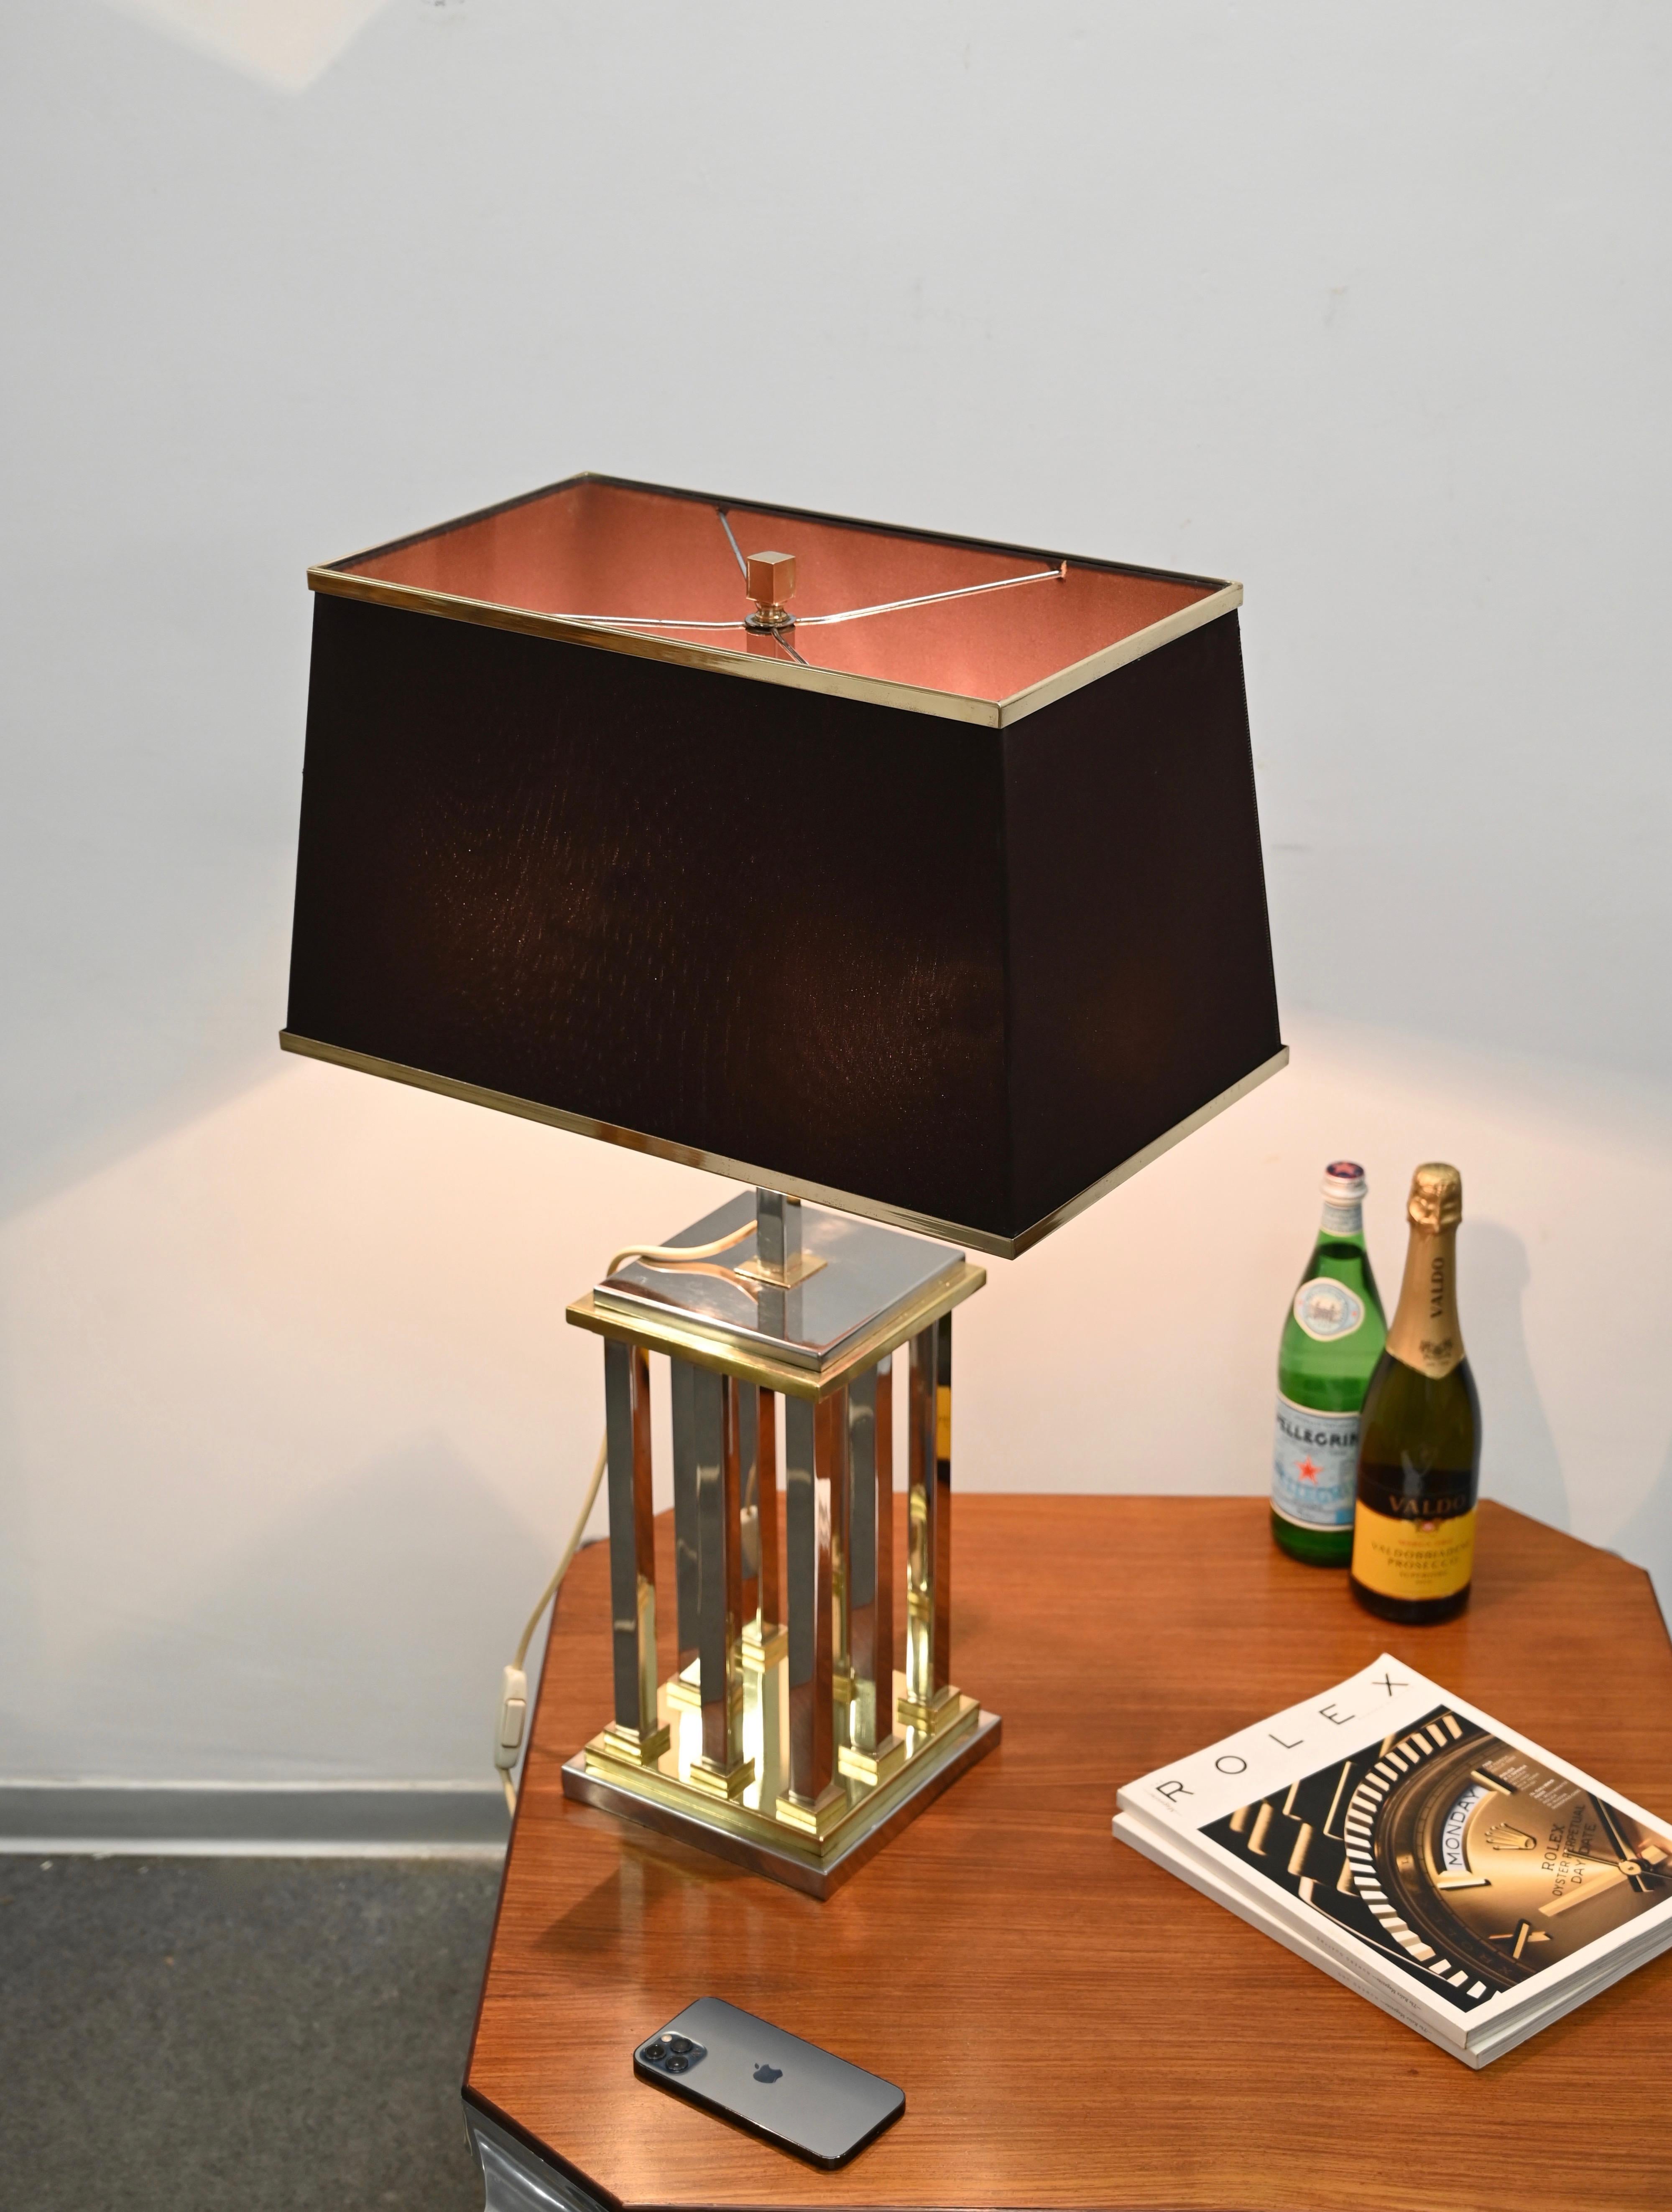 Magnificent large table lamp fully made in chrome and brass designed by Romeo Rega in Italy during the 1970s.

This gorgeous Hollywood Regency style table lamp has a square base in chrome and brass, each side has three square columns made in chrome